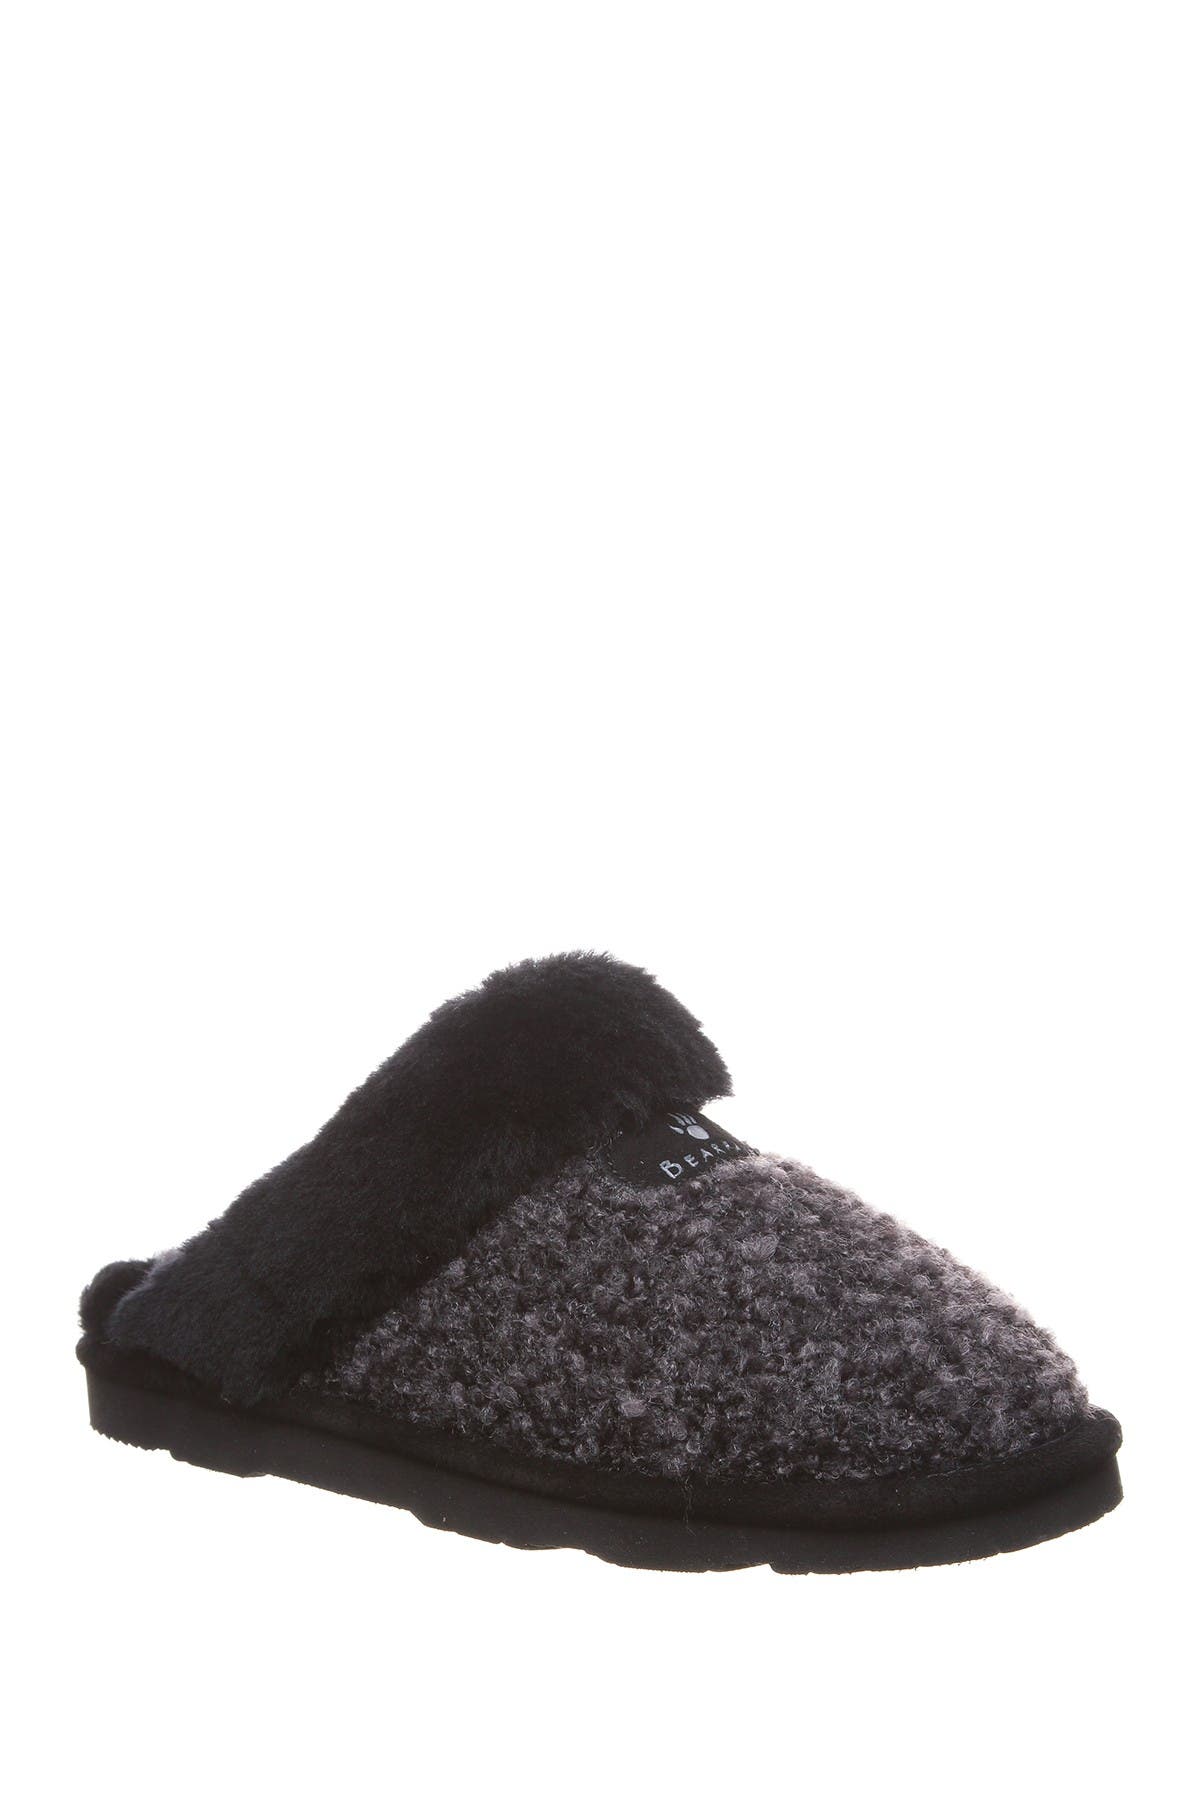 Womens Slippers Nordstrom Flash SAVE 43% - mpgc.net